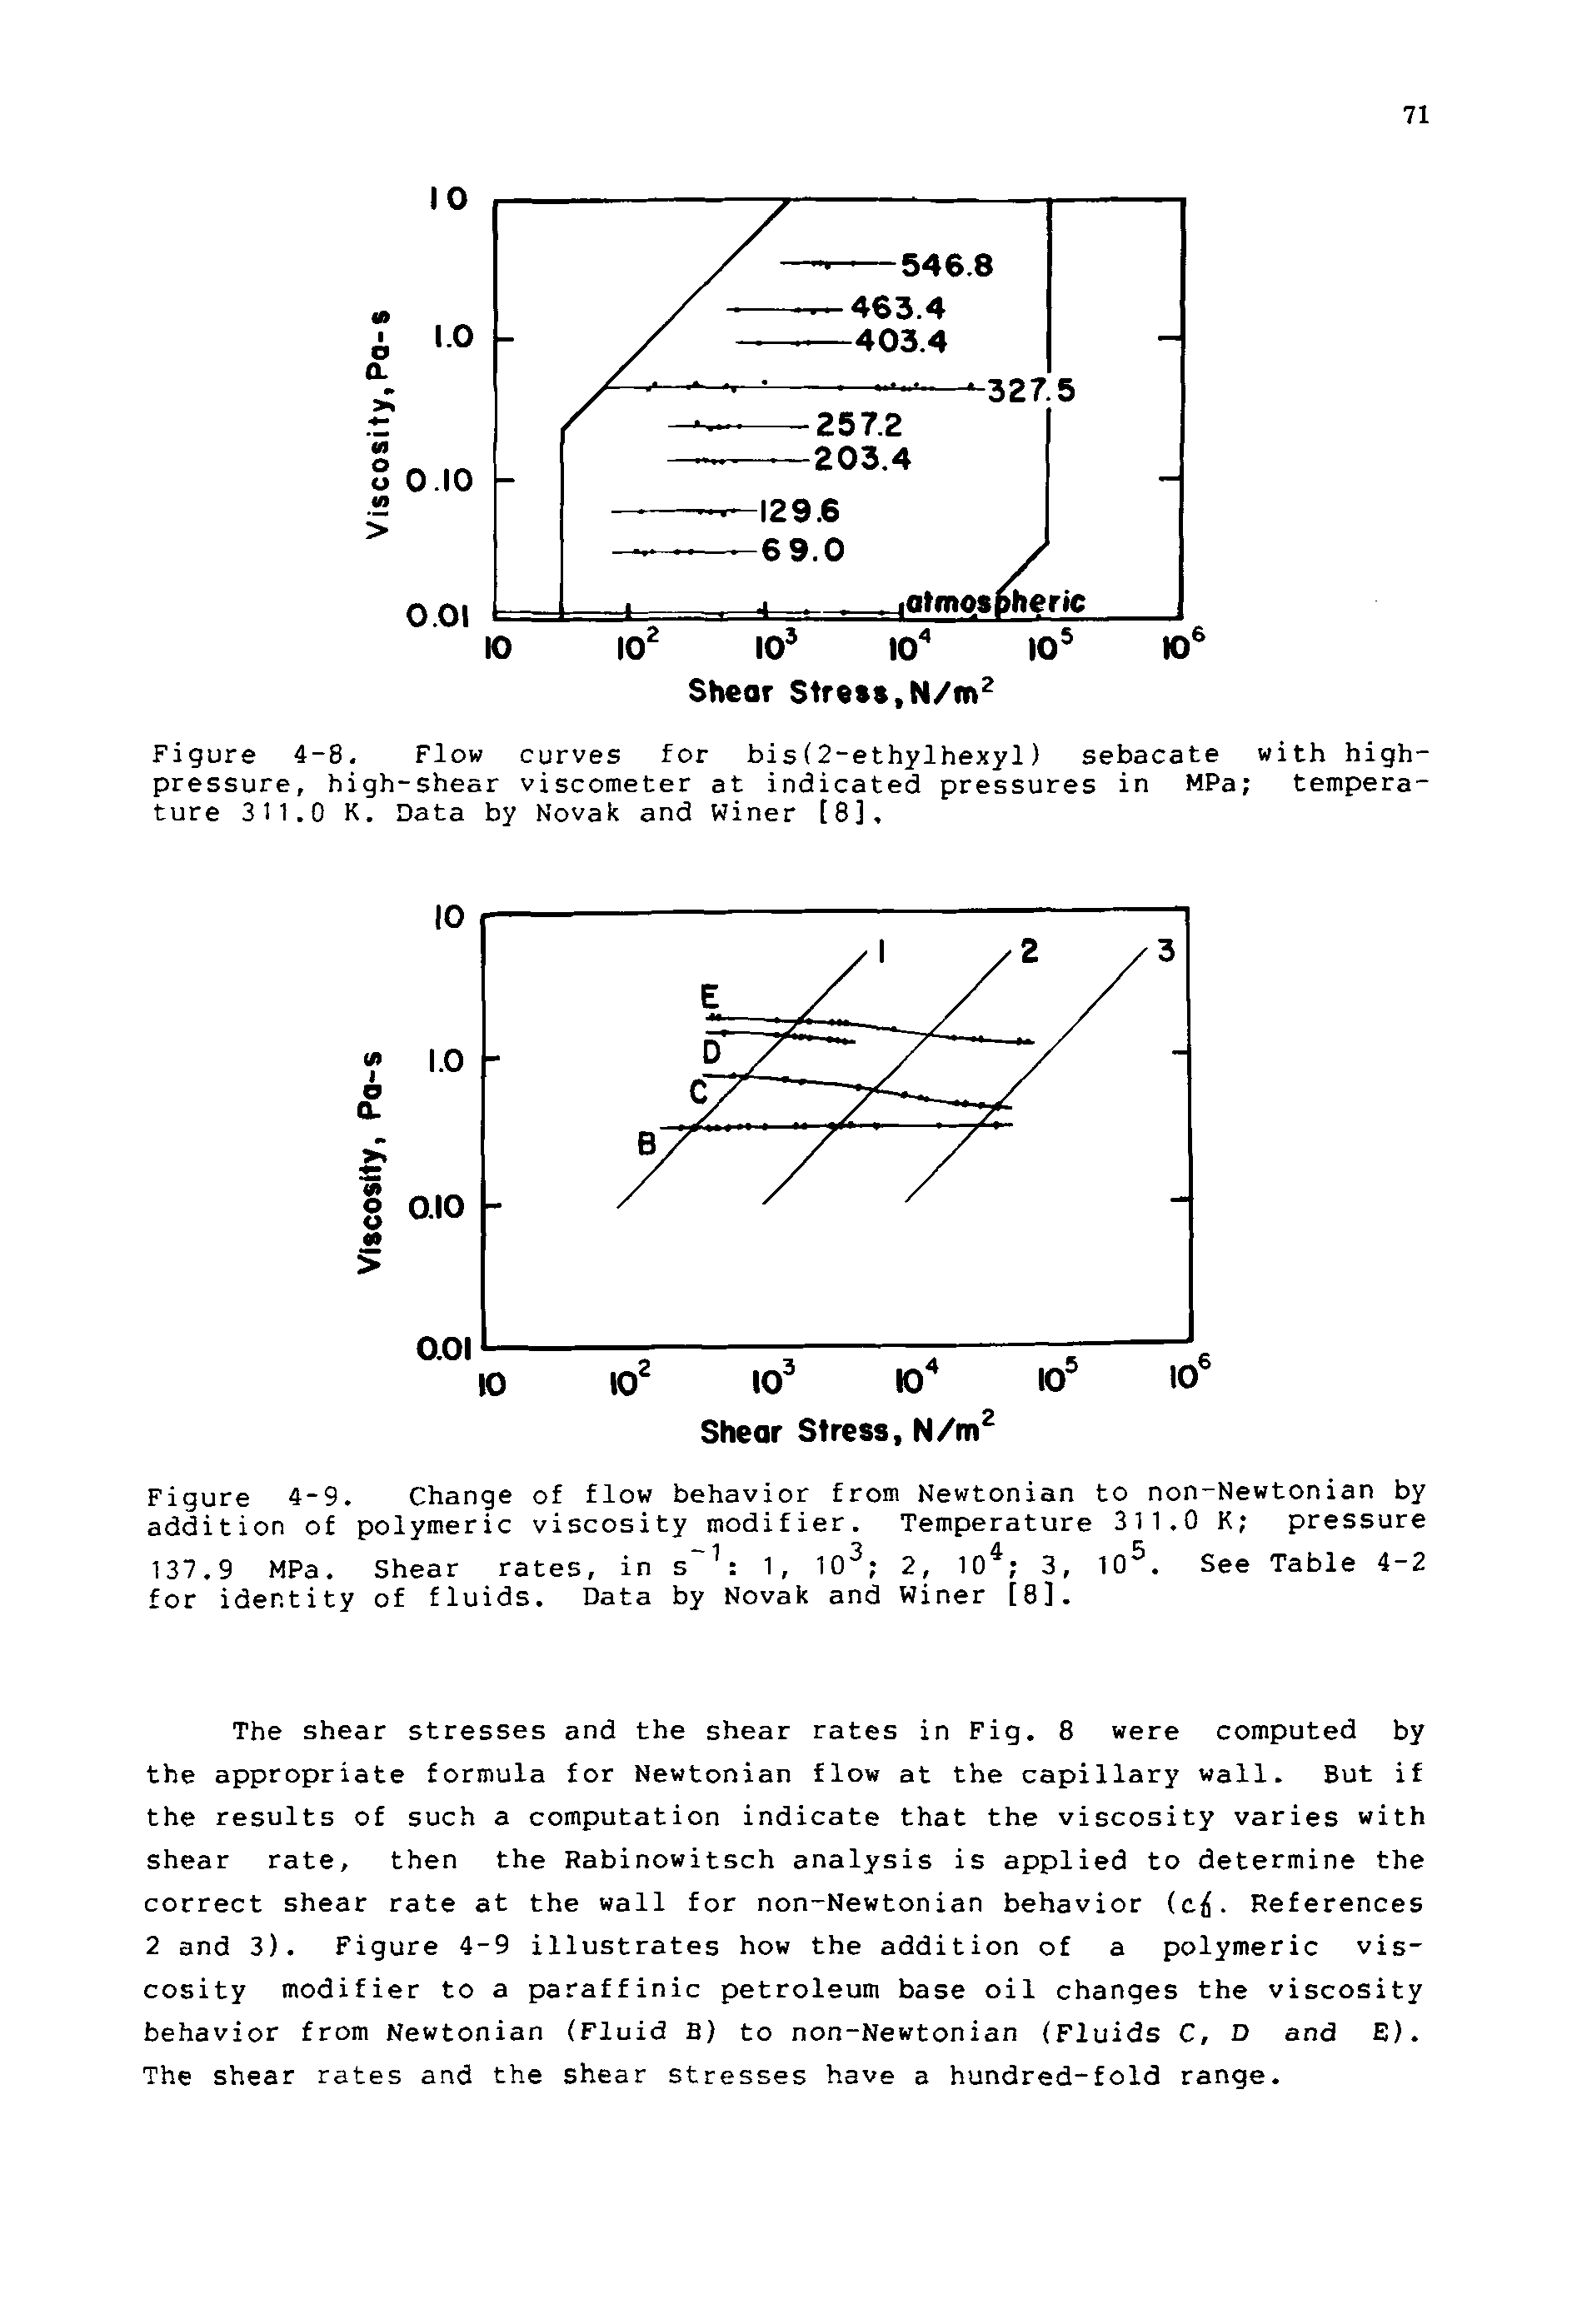 Figure 4-9. Change of flow behavior from Newtonian to non-Newtonian by addition of polymeric viscosity modifier. Temperature 311.0 K pressure...